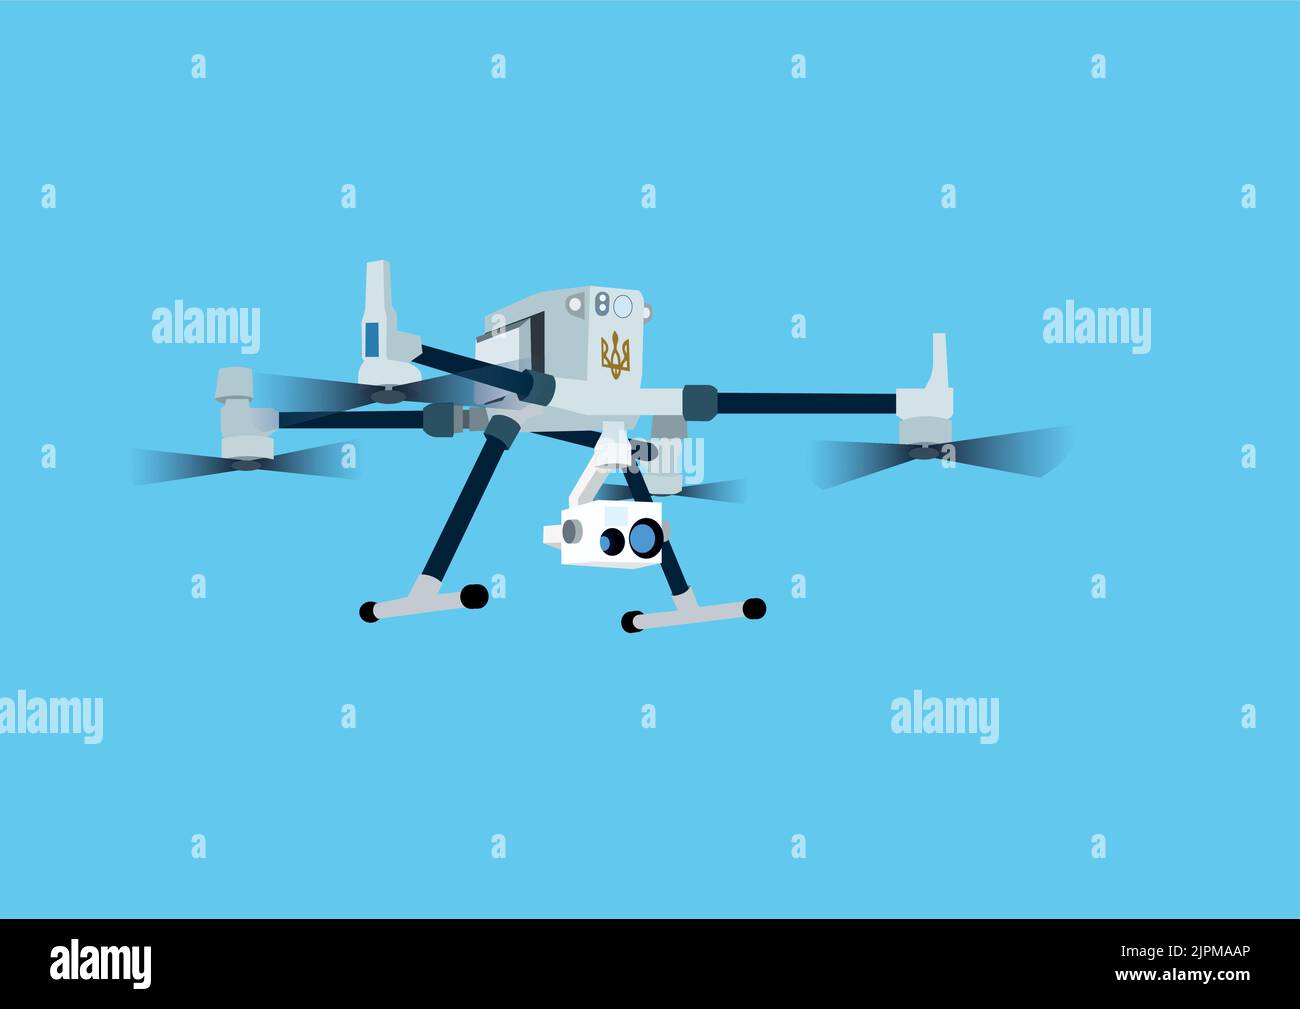 illustration of cartoon military drone with video camera and ukrainian trident on blue background,stock illustration Stock Vector